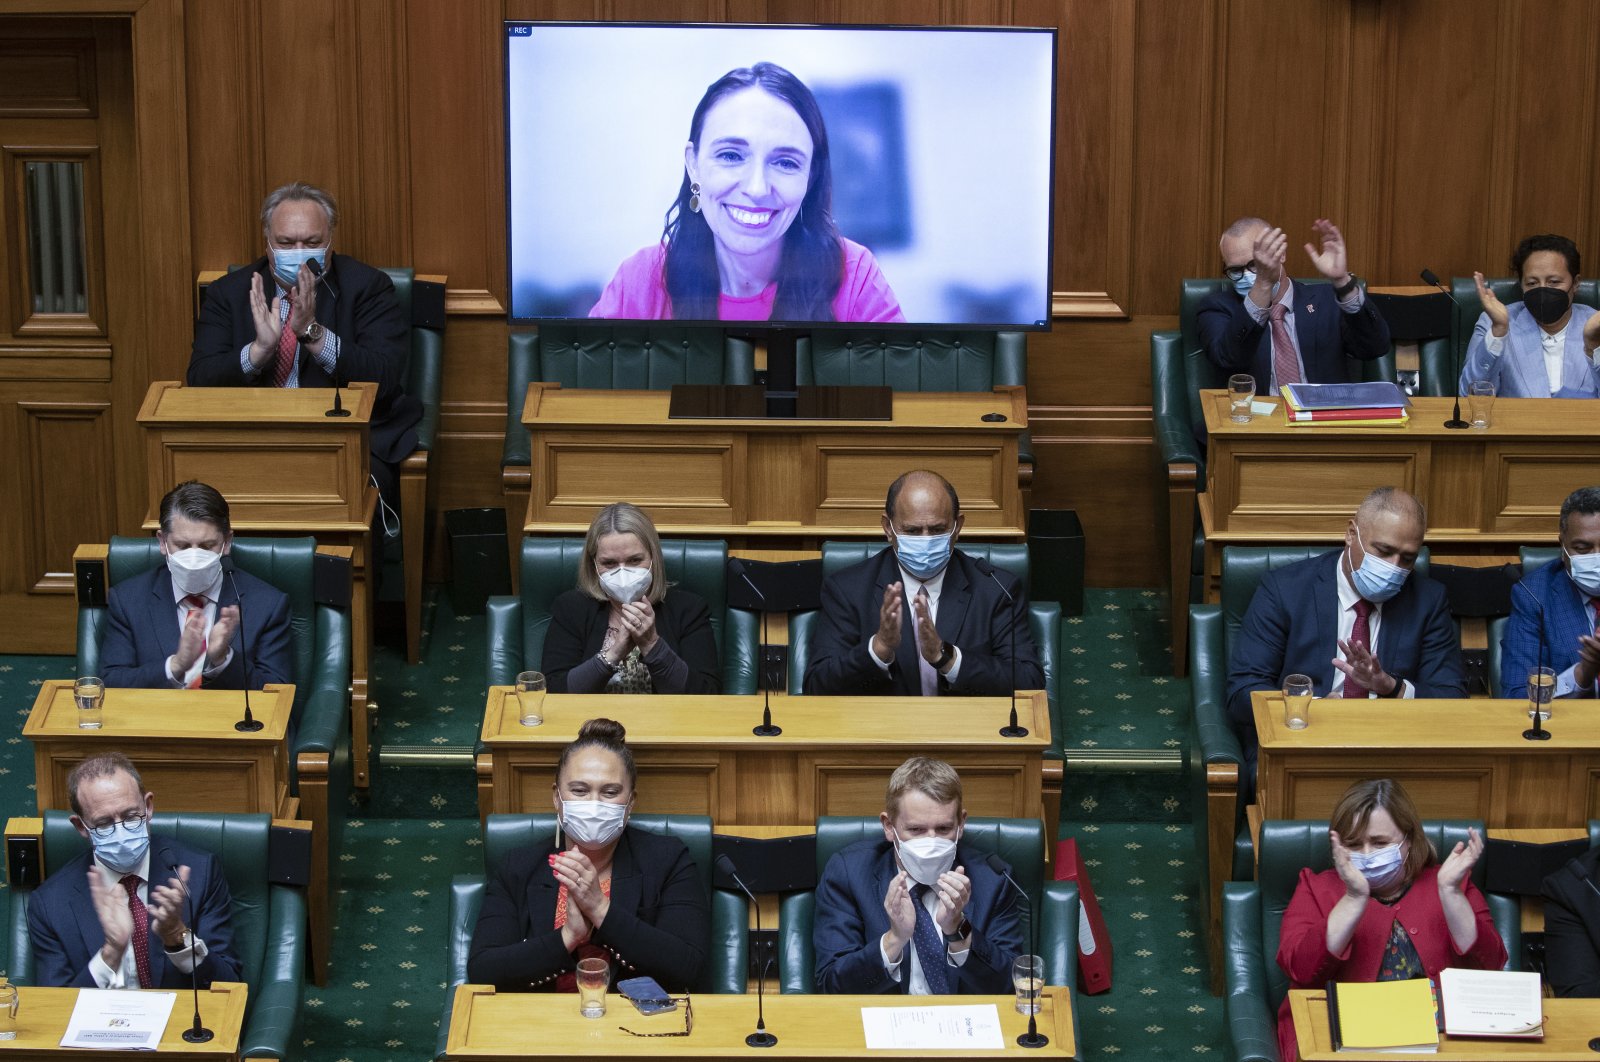 New Zealand Prime Minister Jacinda Ardern receives applause from colleagues after her address to parliament via a video link as she isolates herself at home after catching COVID-19 in Wellington, New Zealand, May 19, 2022. (AP Photo)